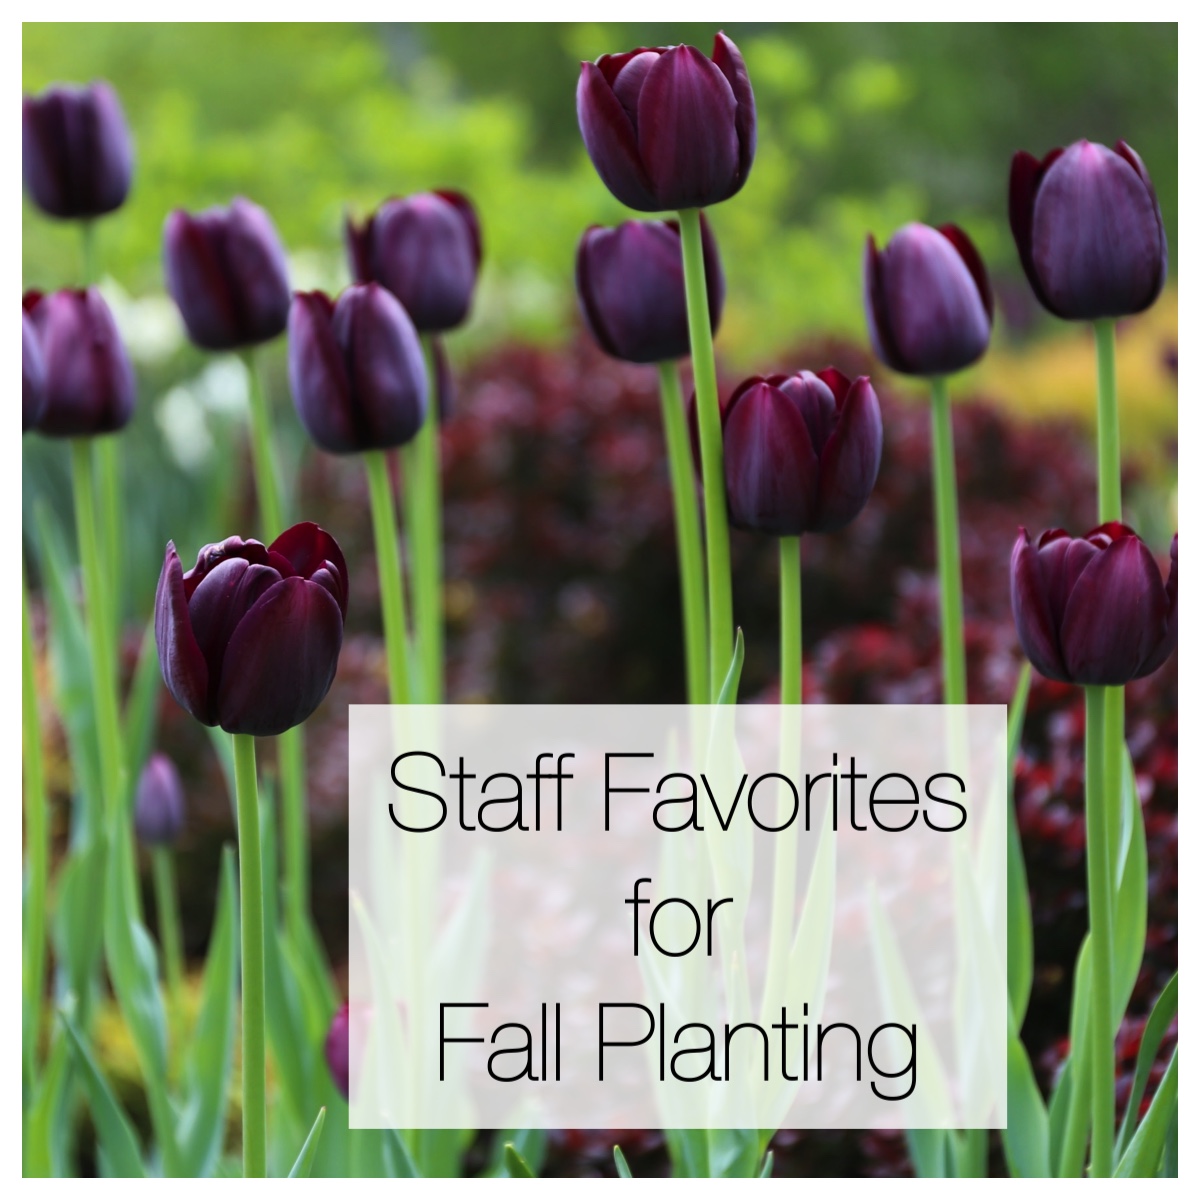 This Year's Staff Favorites for Fall Planting